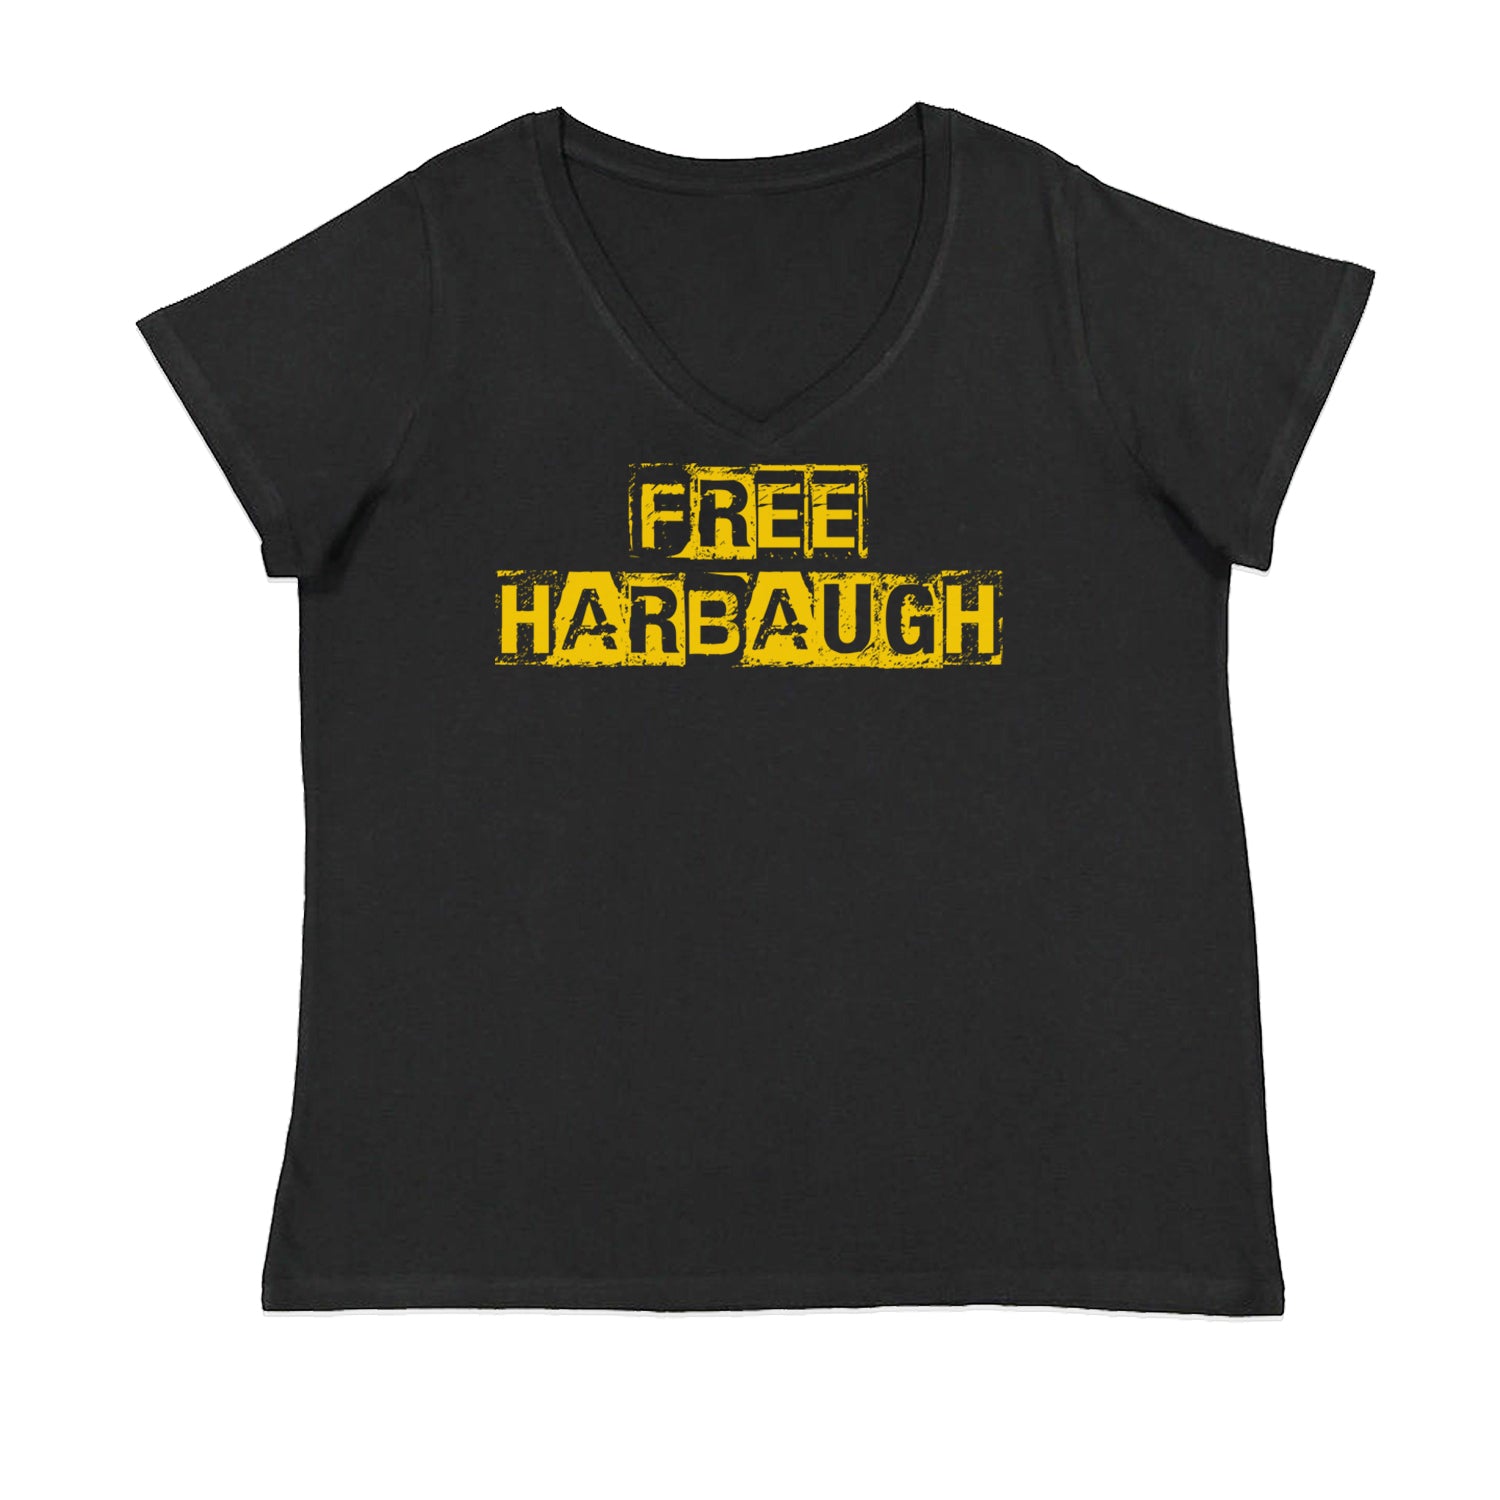 Free Harbaugh Release Our Coach Womens Plus Size V-Neck T-shirt